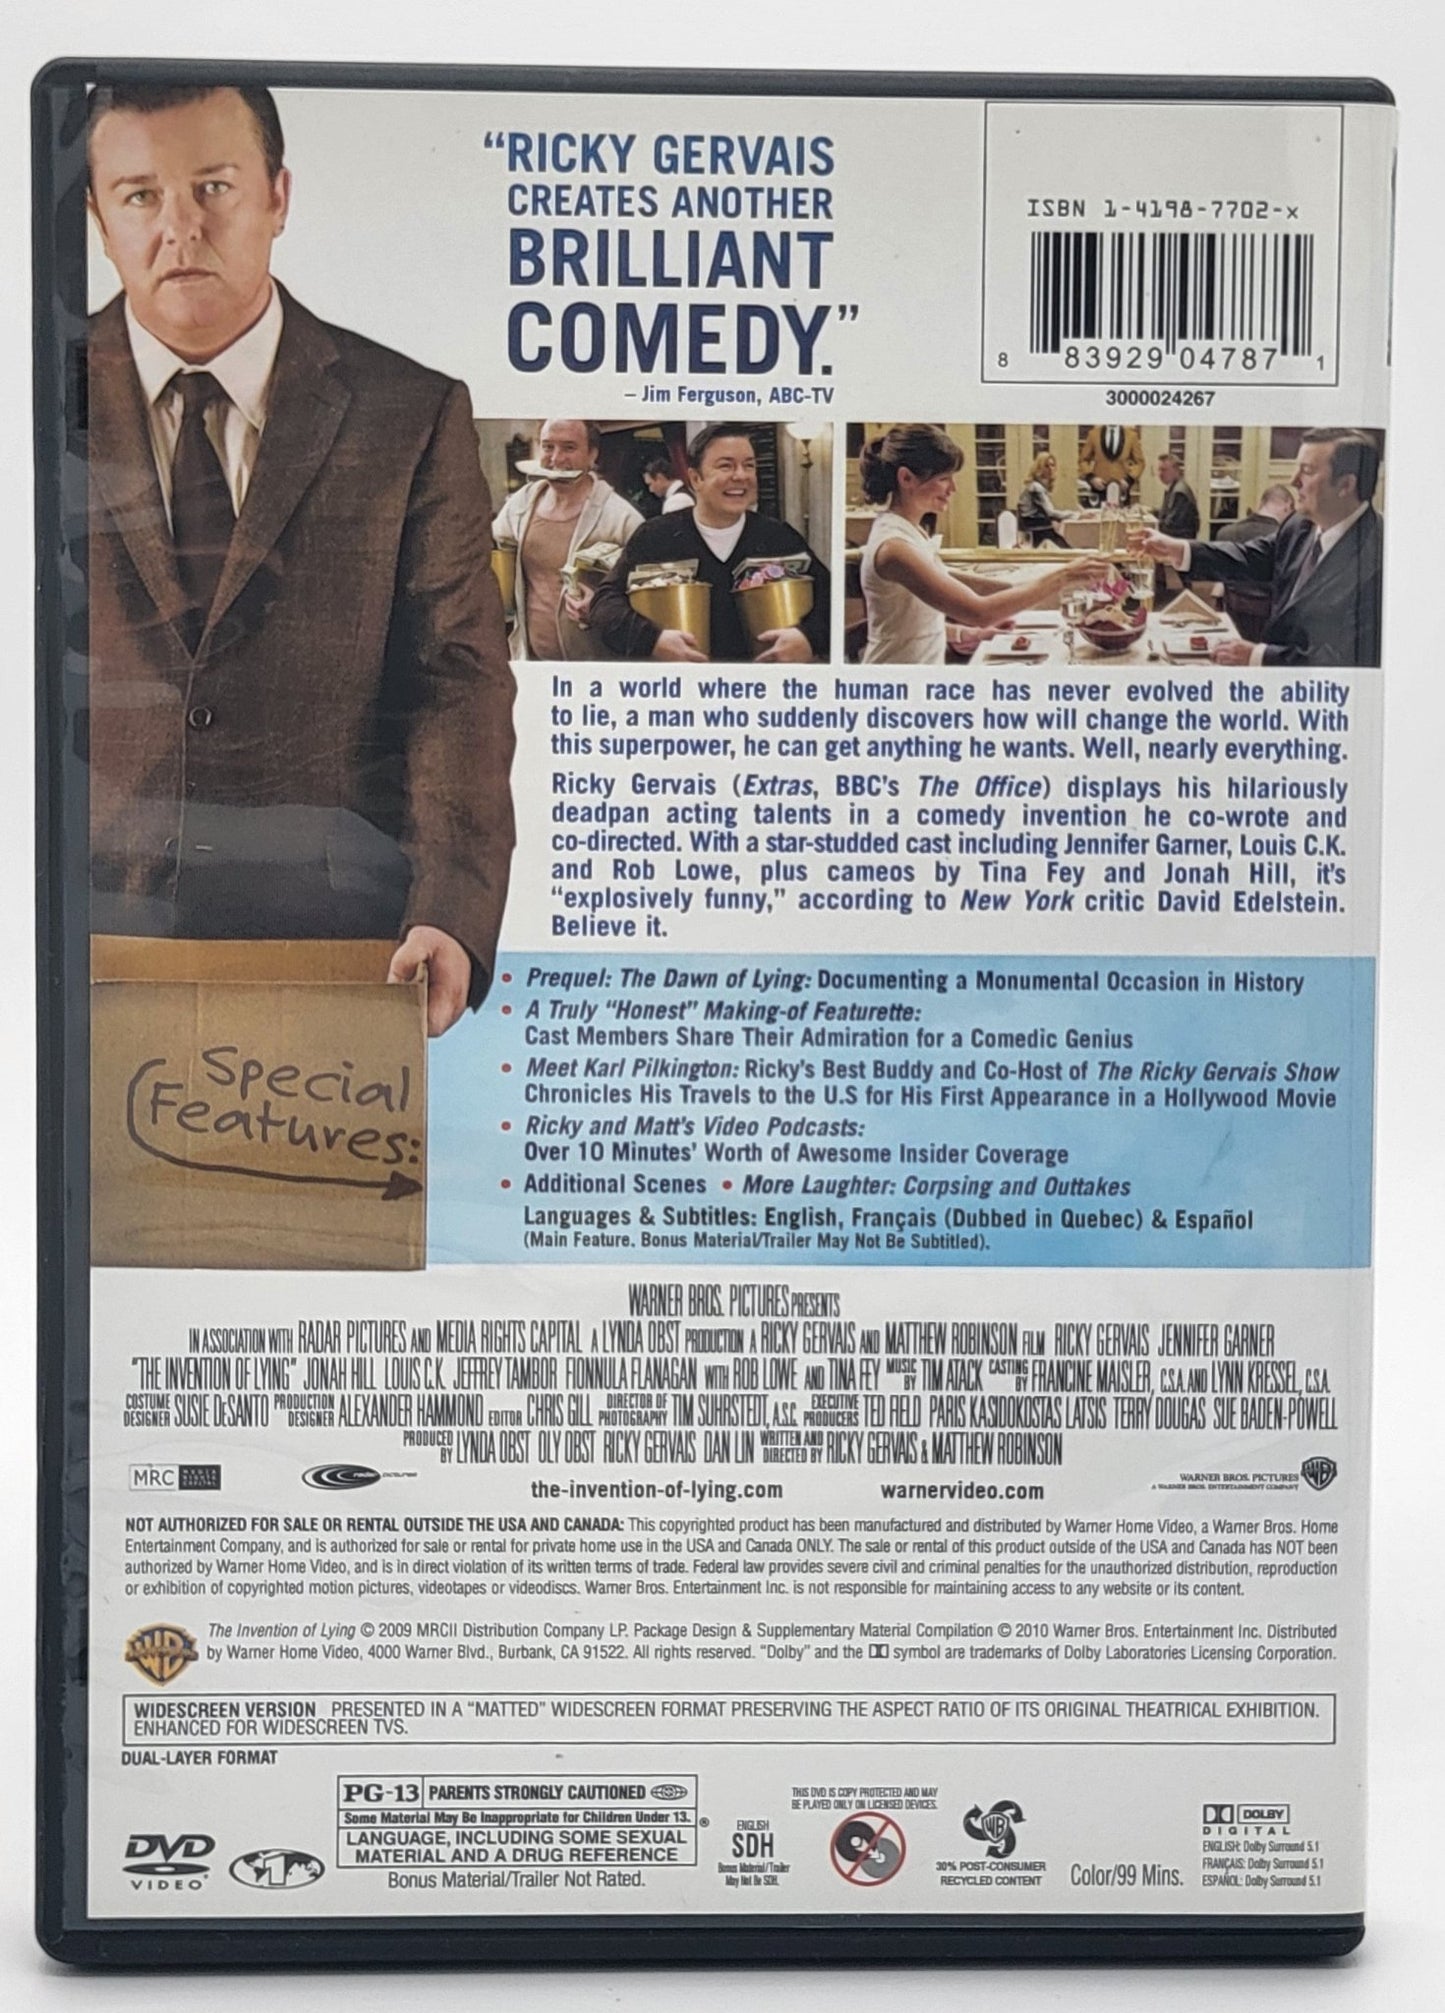 Warner Brothers - The Invention of Lying | DVD | Widescreen - DVD - Steady Bunny Shop